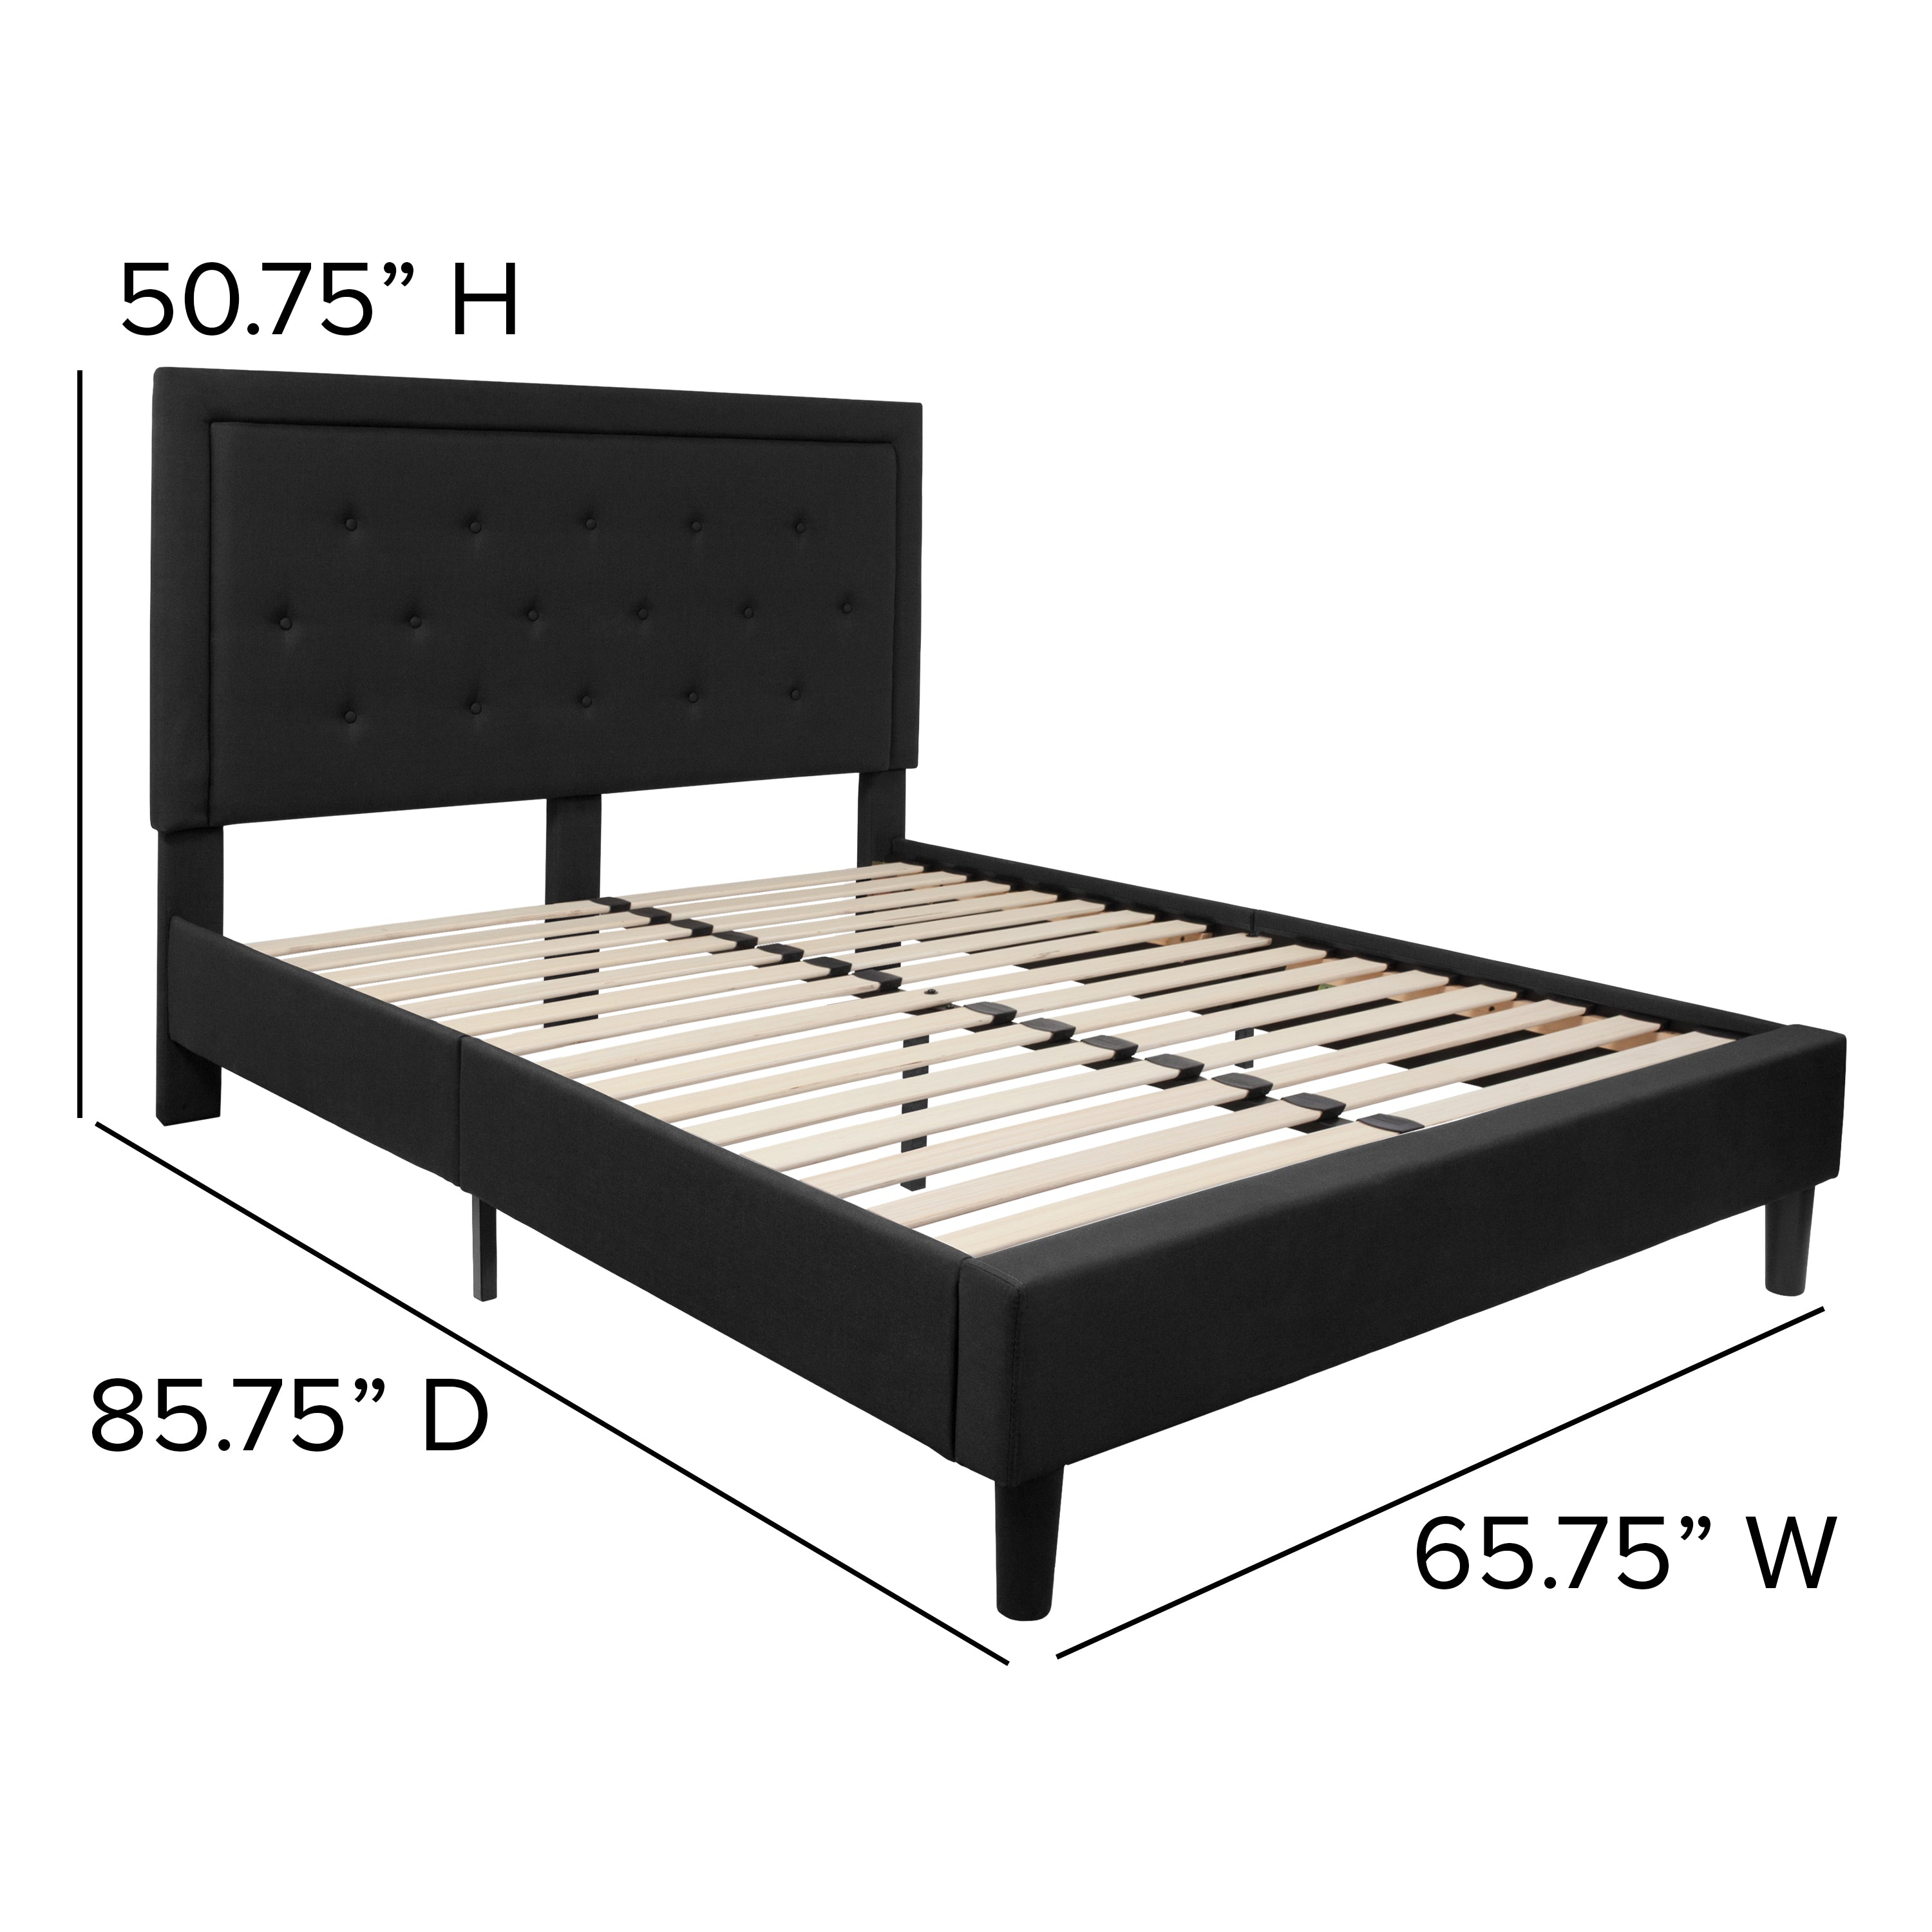 Roxbury Tufted Upholstered Platform Bed with 10 Inch CertiPUR-US Certified Foam and Pocket Spring Mattress-Bed & Mattress-Flash Furniture-Wall2Wall Furnishings